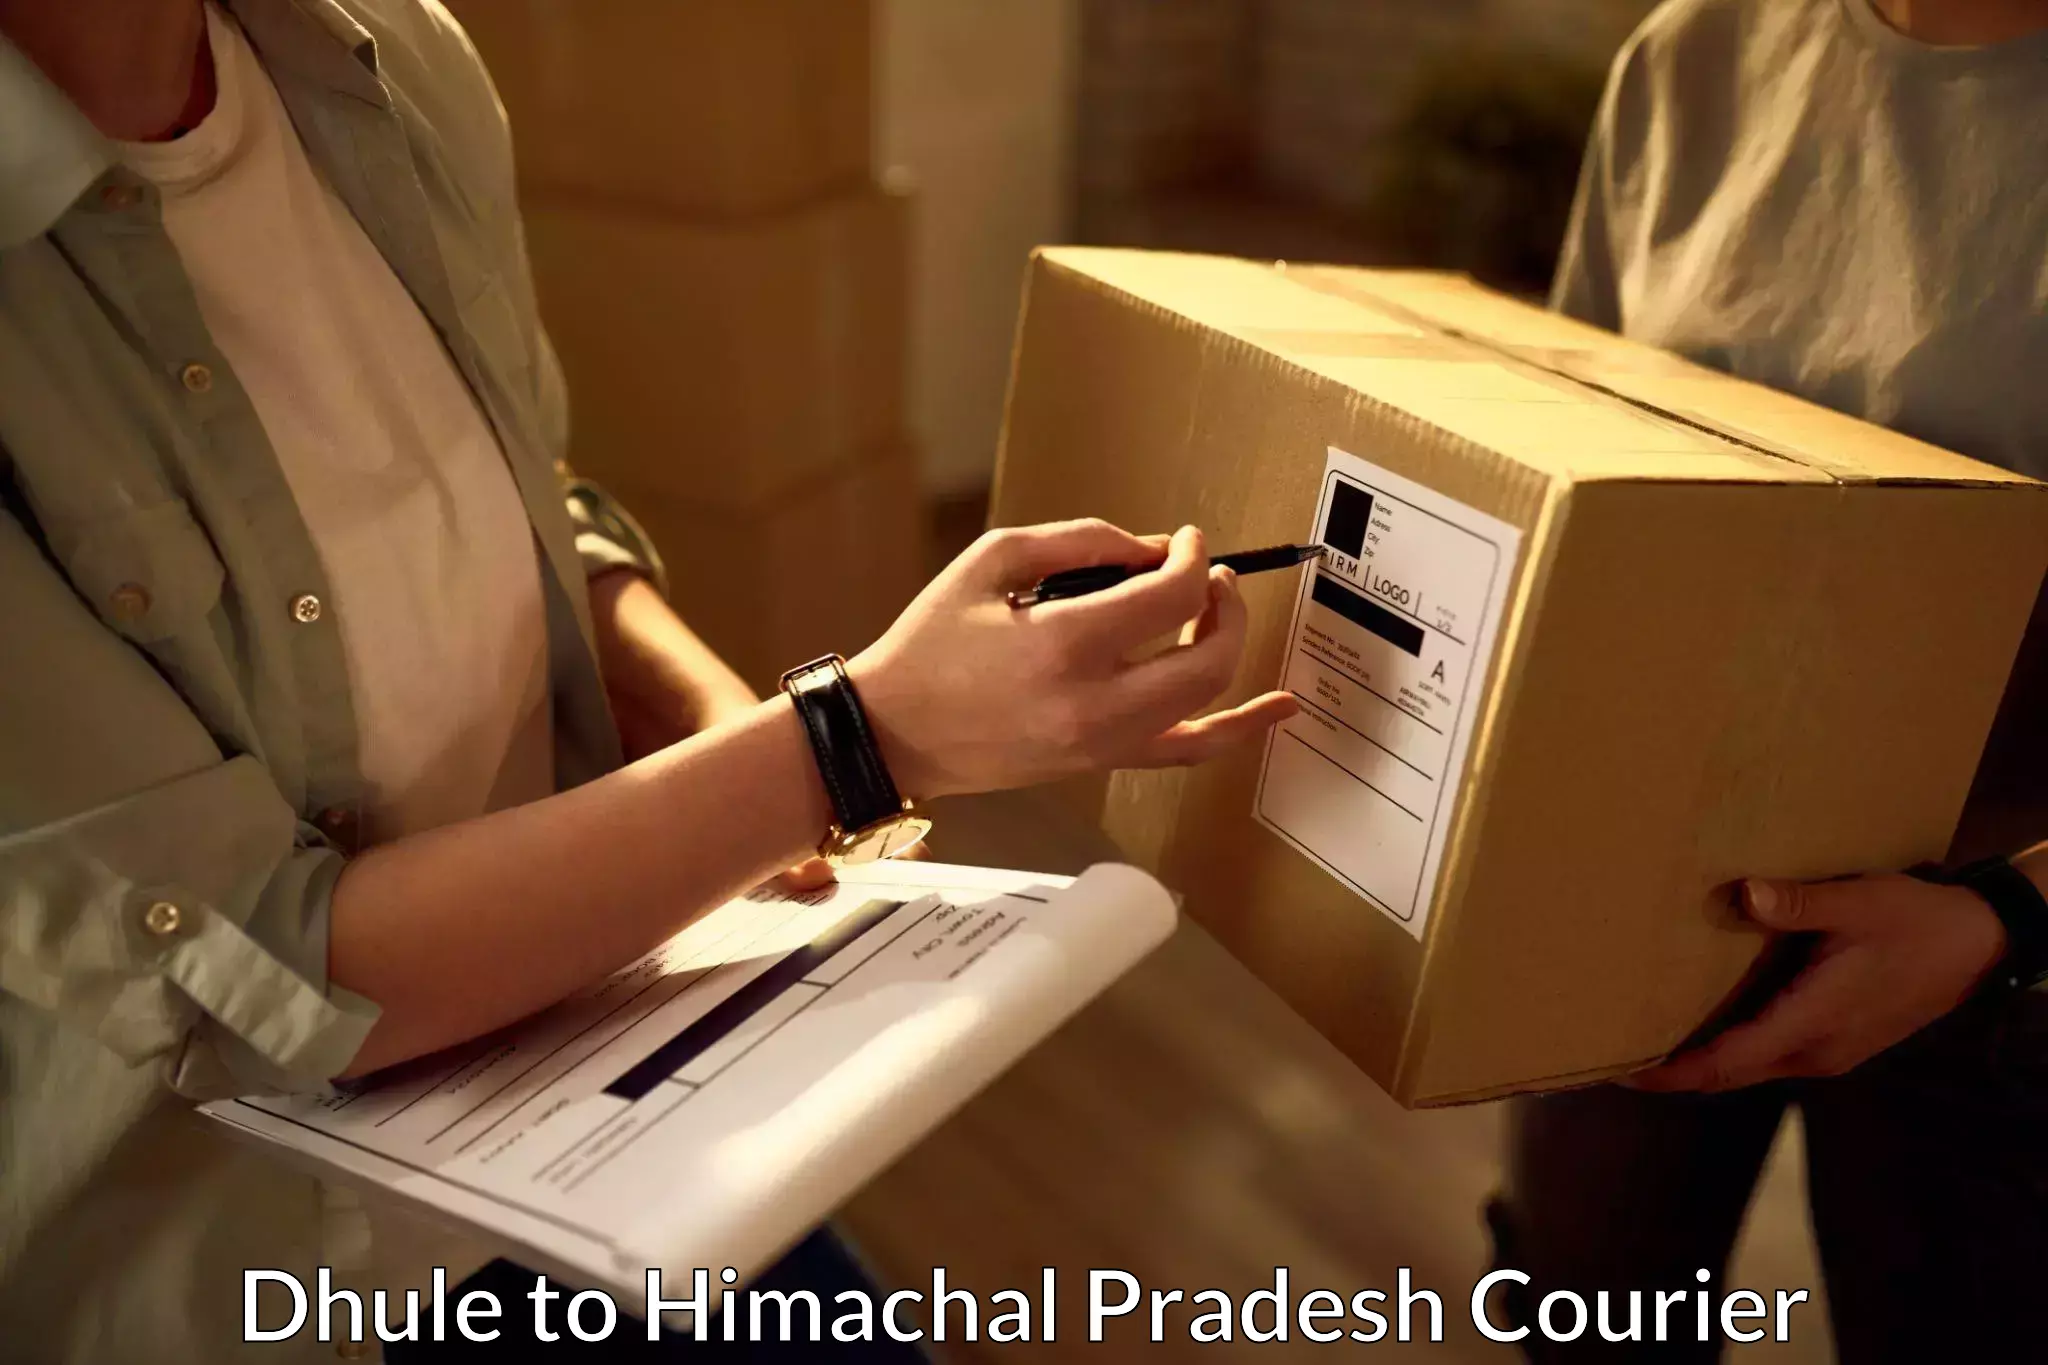 Efficient courier operations Dhule to Himachal Pradesh